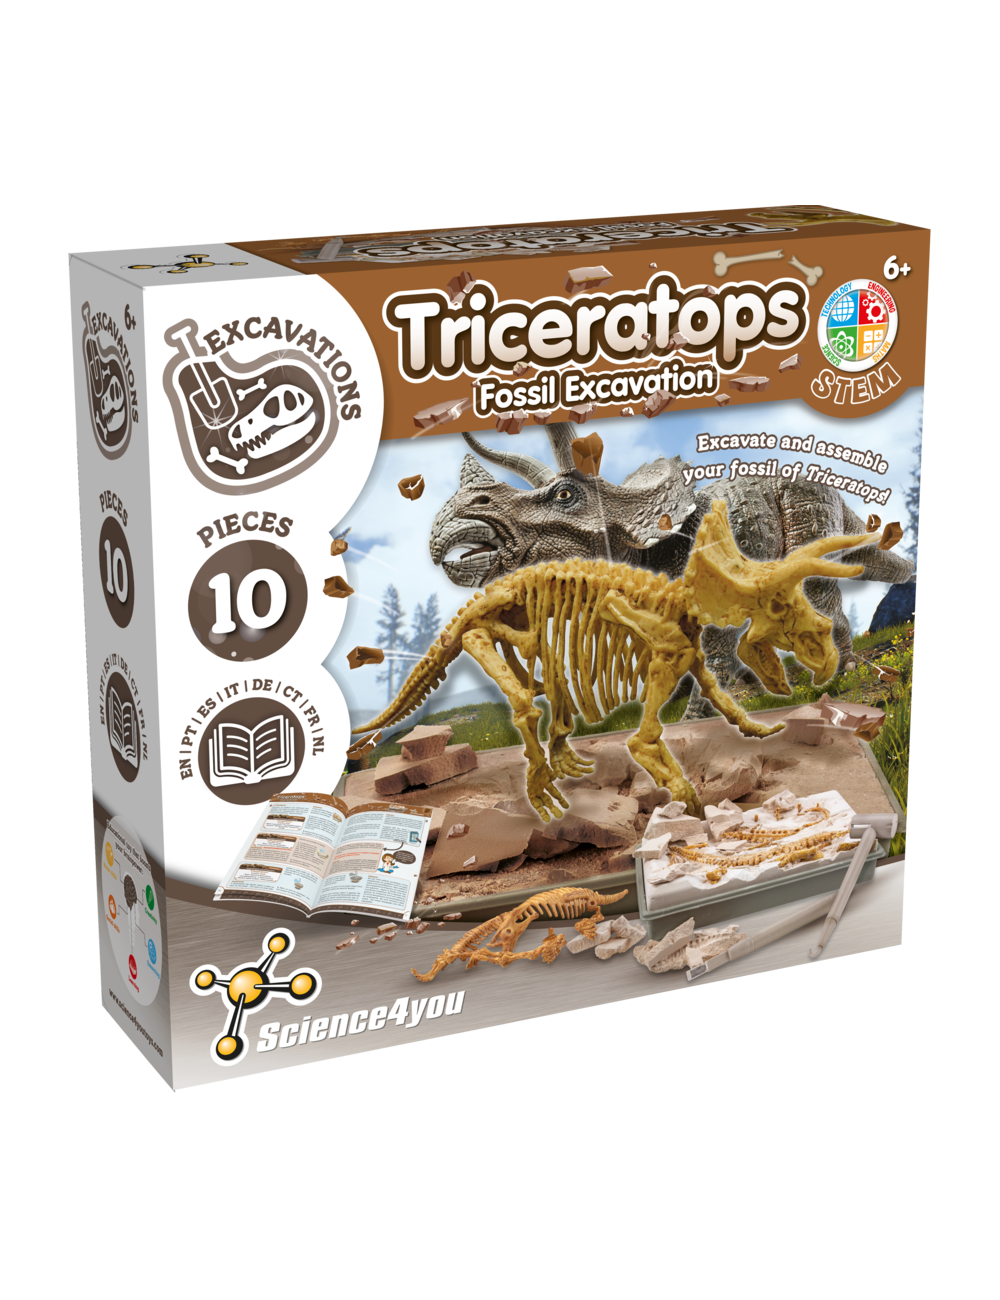 Triceratops Dinosaur Dig Puzzl Kit Fossil Scientific Education Assemble STEM Toy 